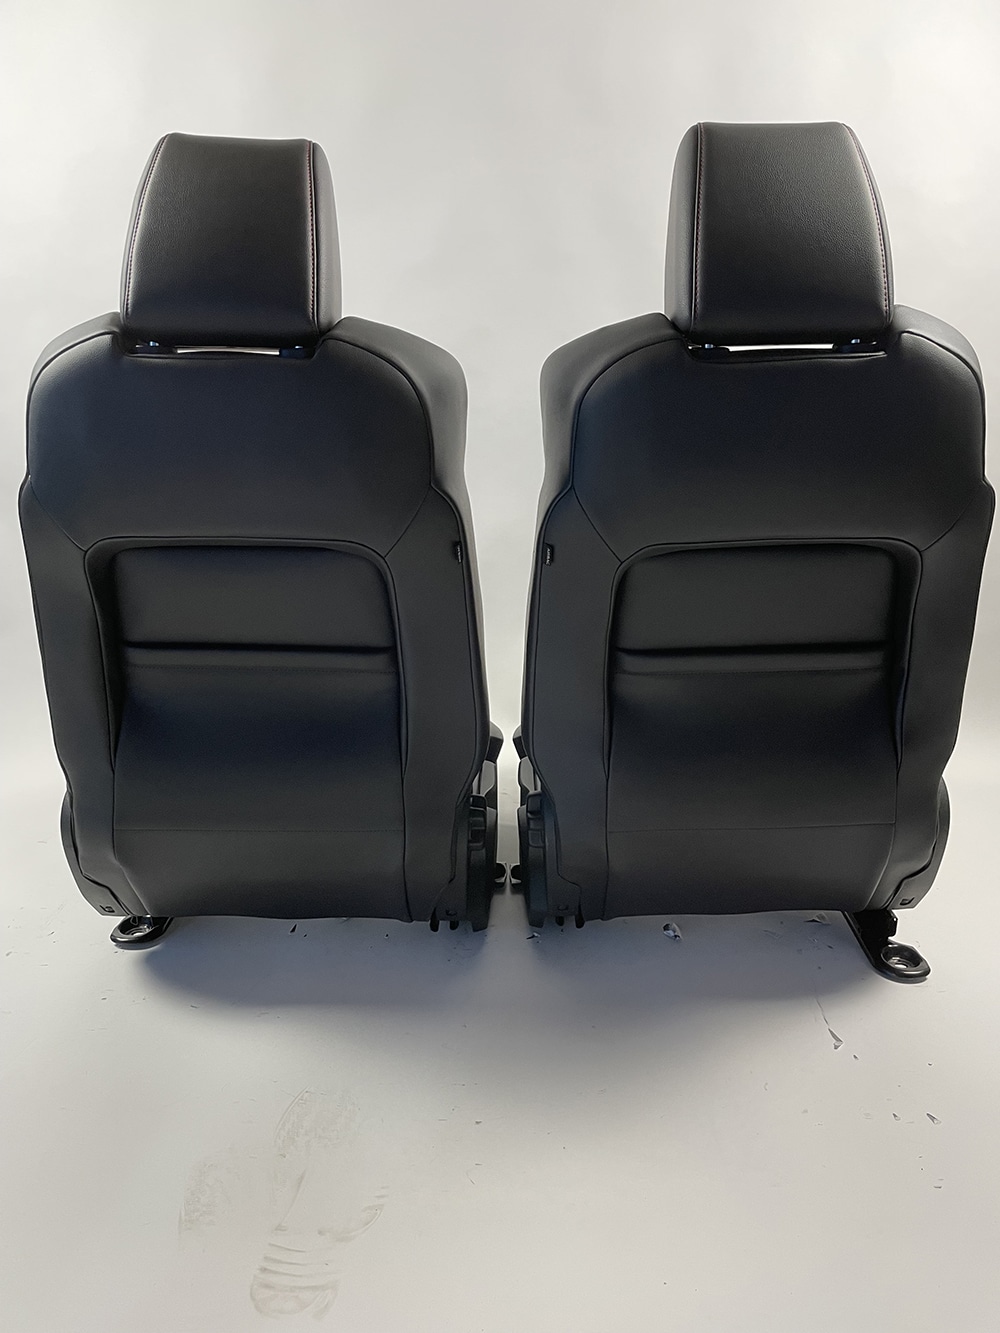 10004 10005 Ford Focus Seats 14